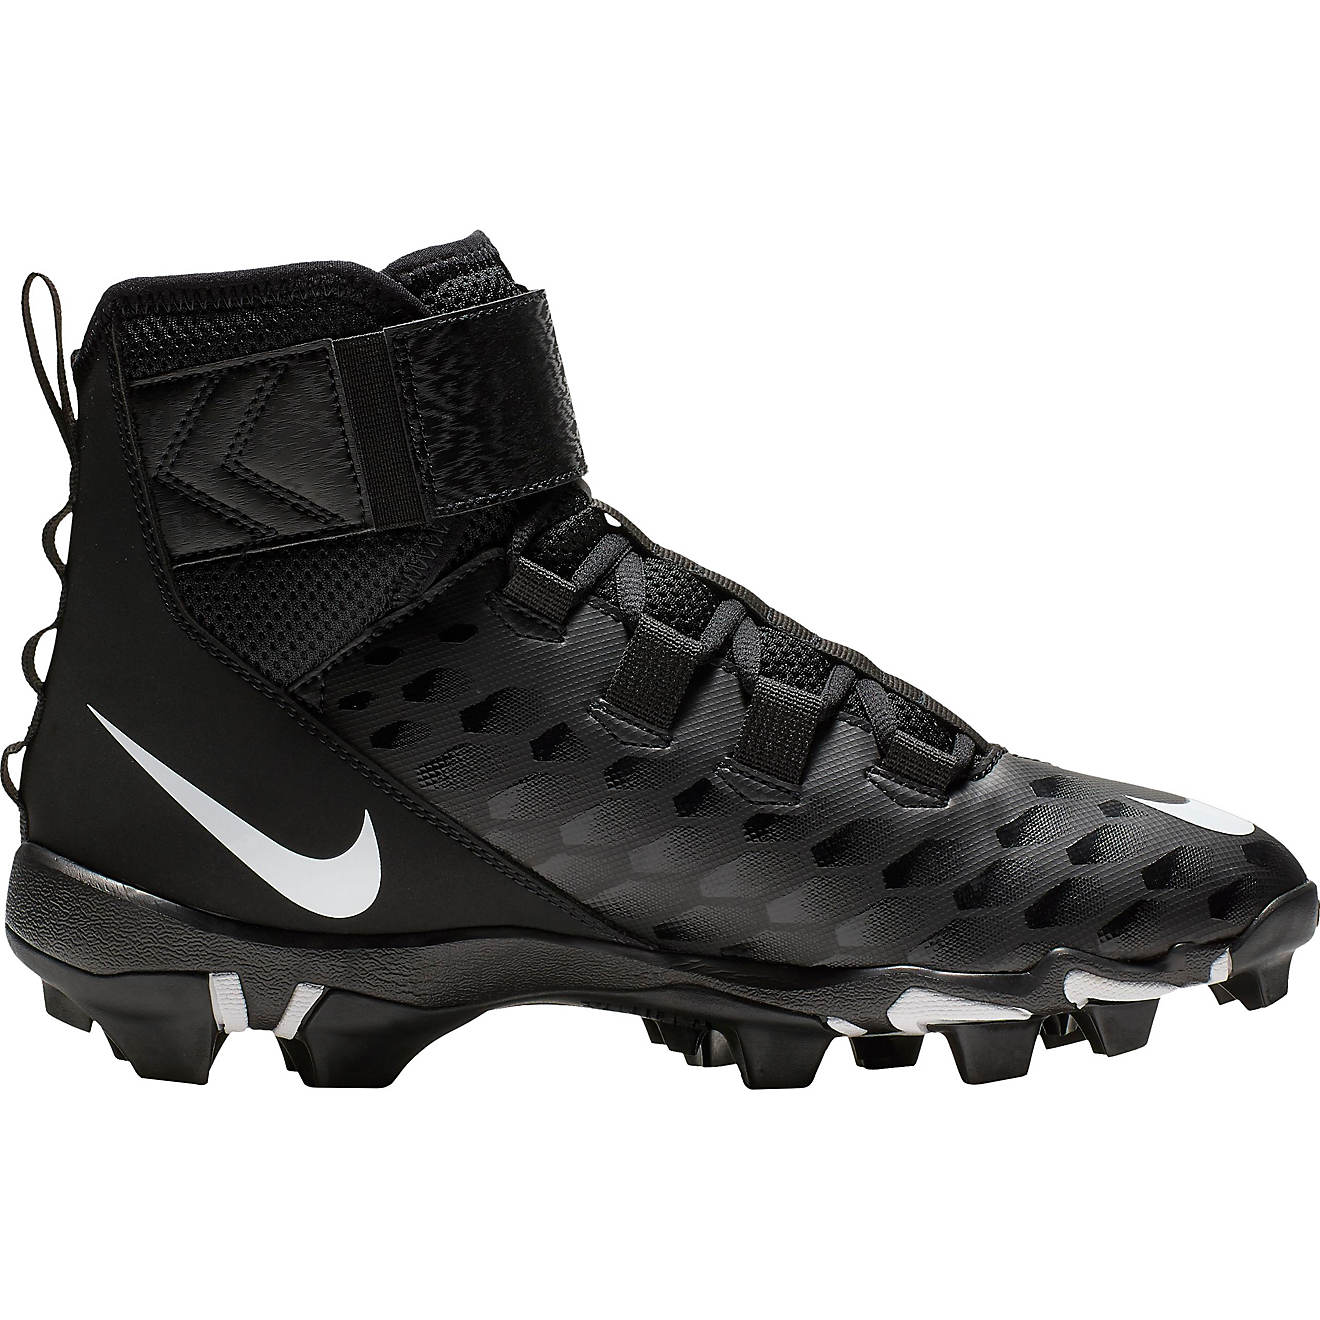 Nike Men's Force Savage Shark 2 Football Cleats on Sale At Academy Sports + Outdoors